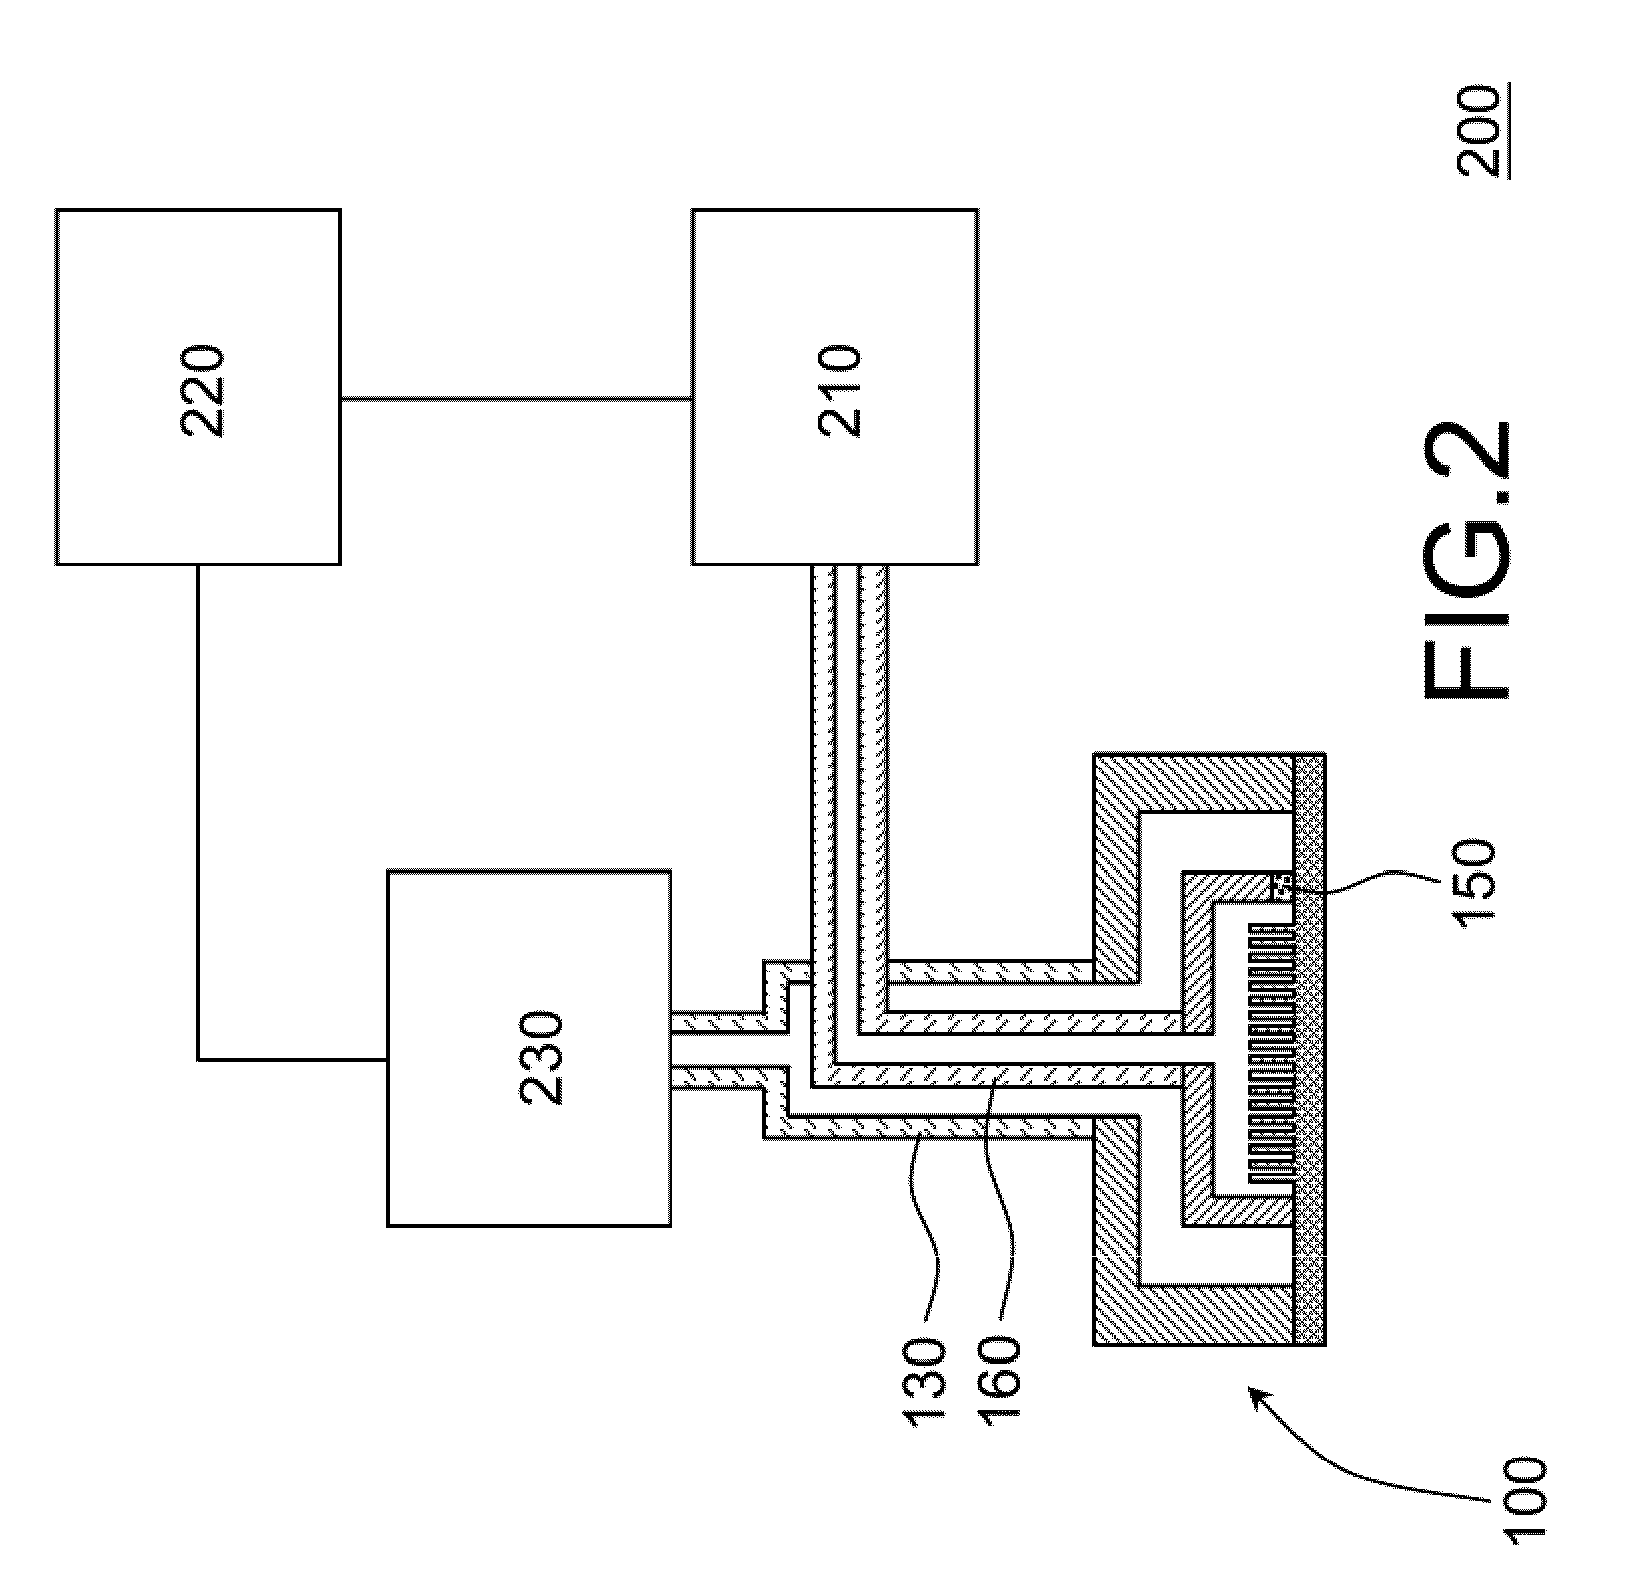 Cold plate and refrigeration system